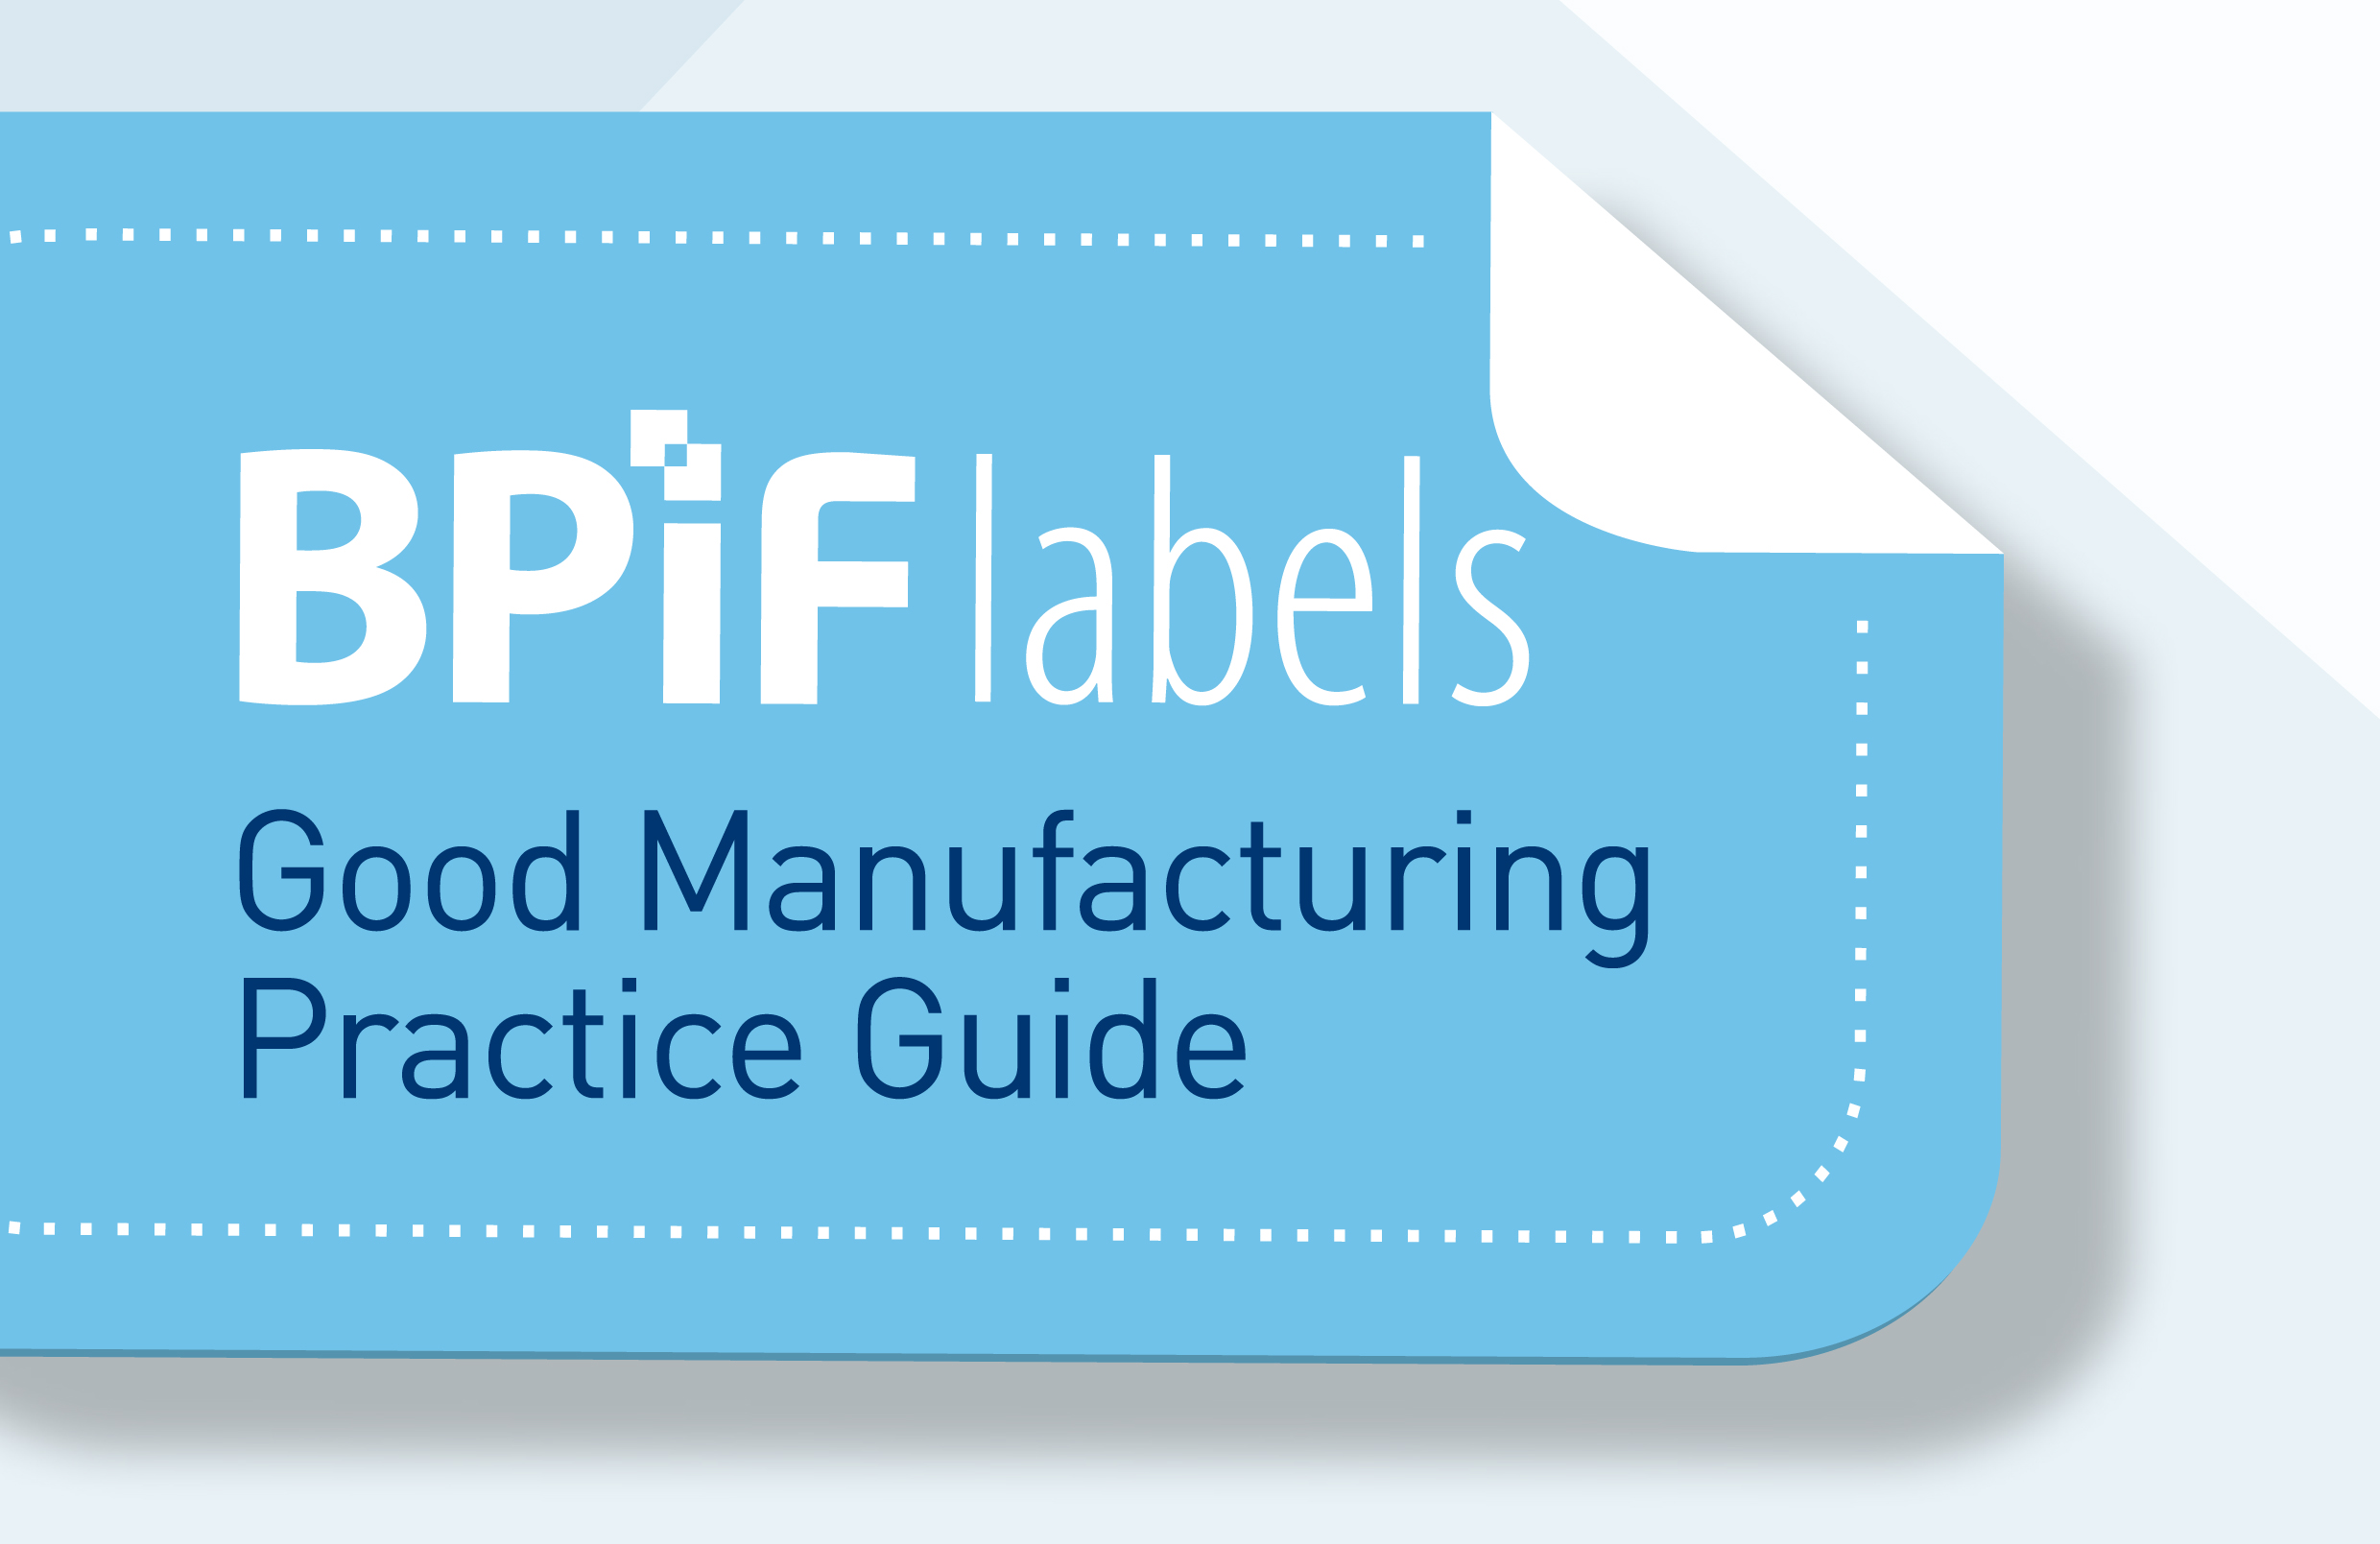 How the BPIF can help printers address production problems and assist with education and training